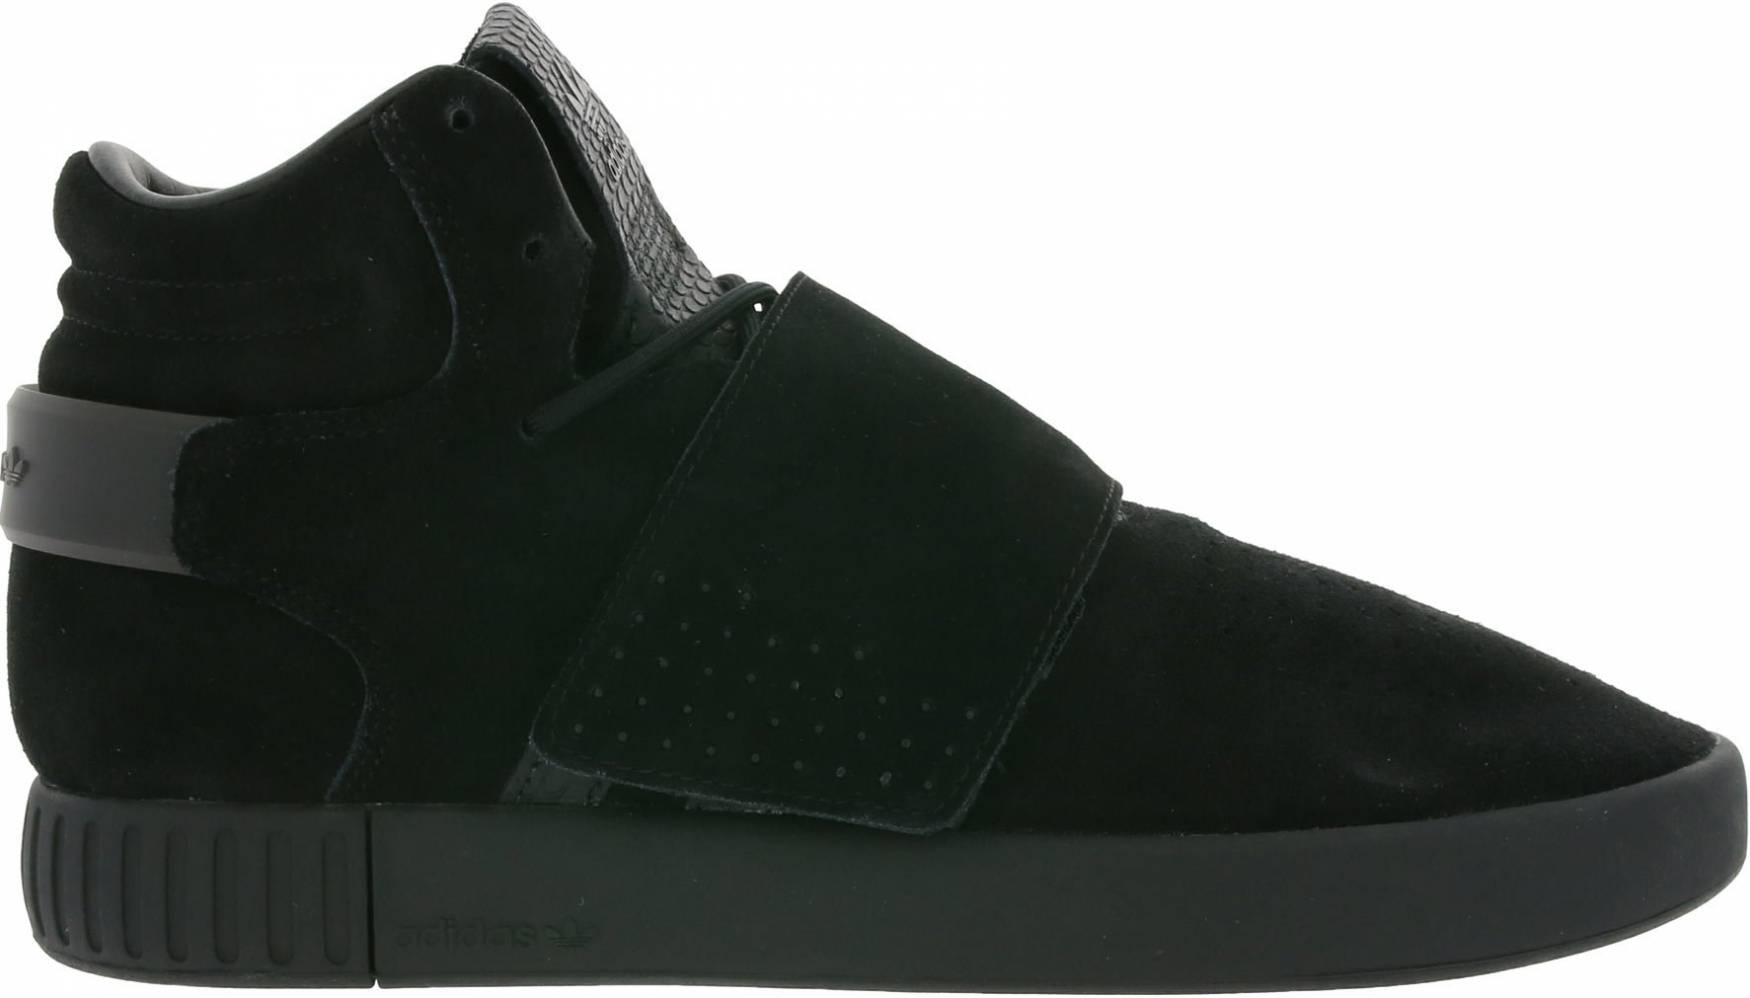 Adidas Tubular Invader Strap sneakers in 10 colors (only $69 ...